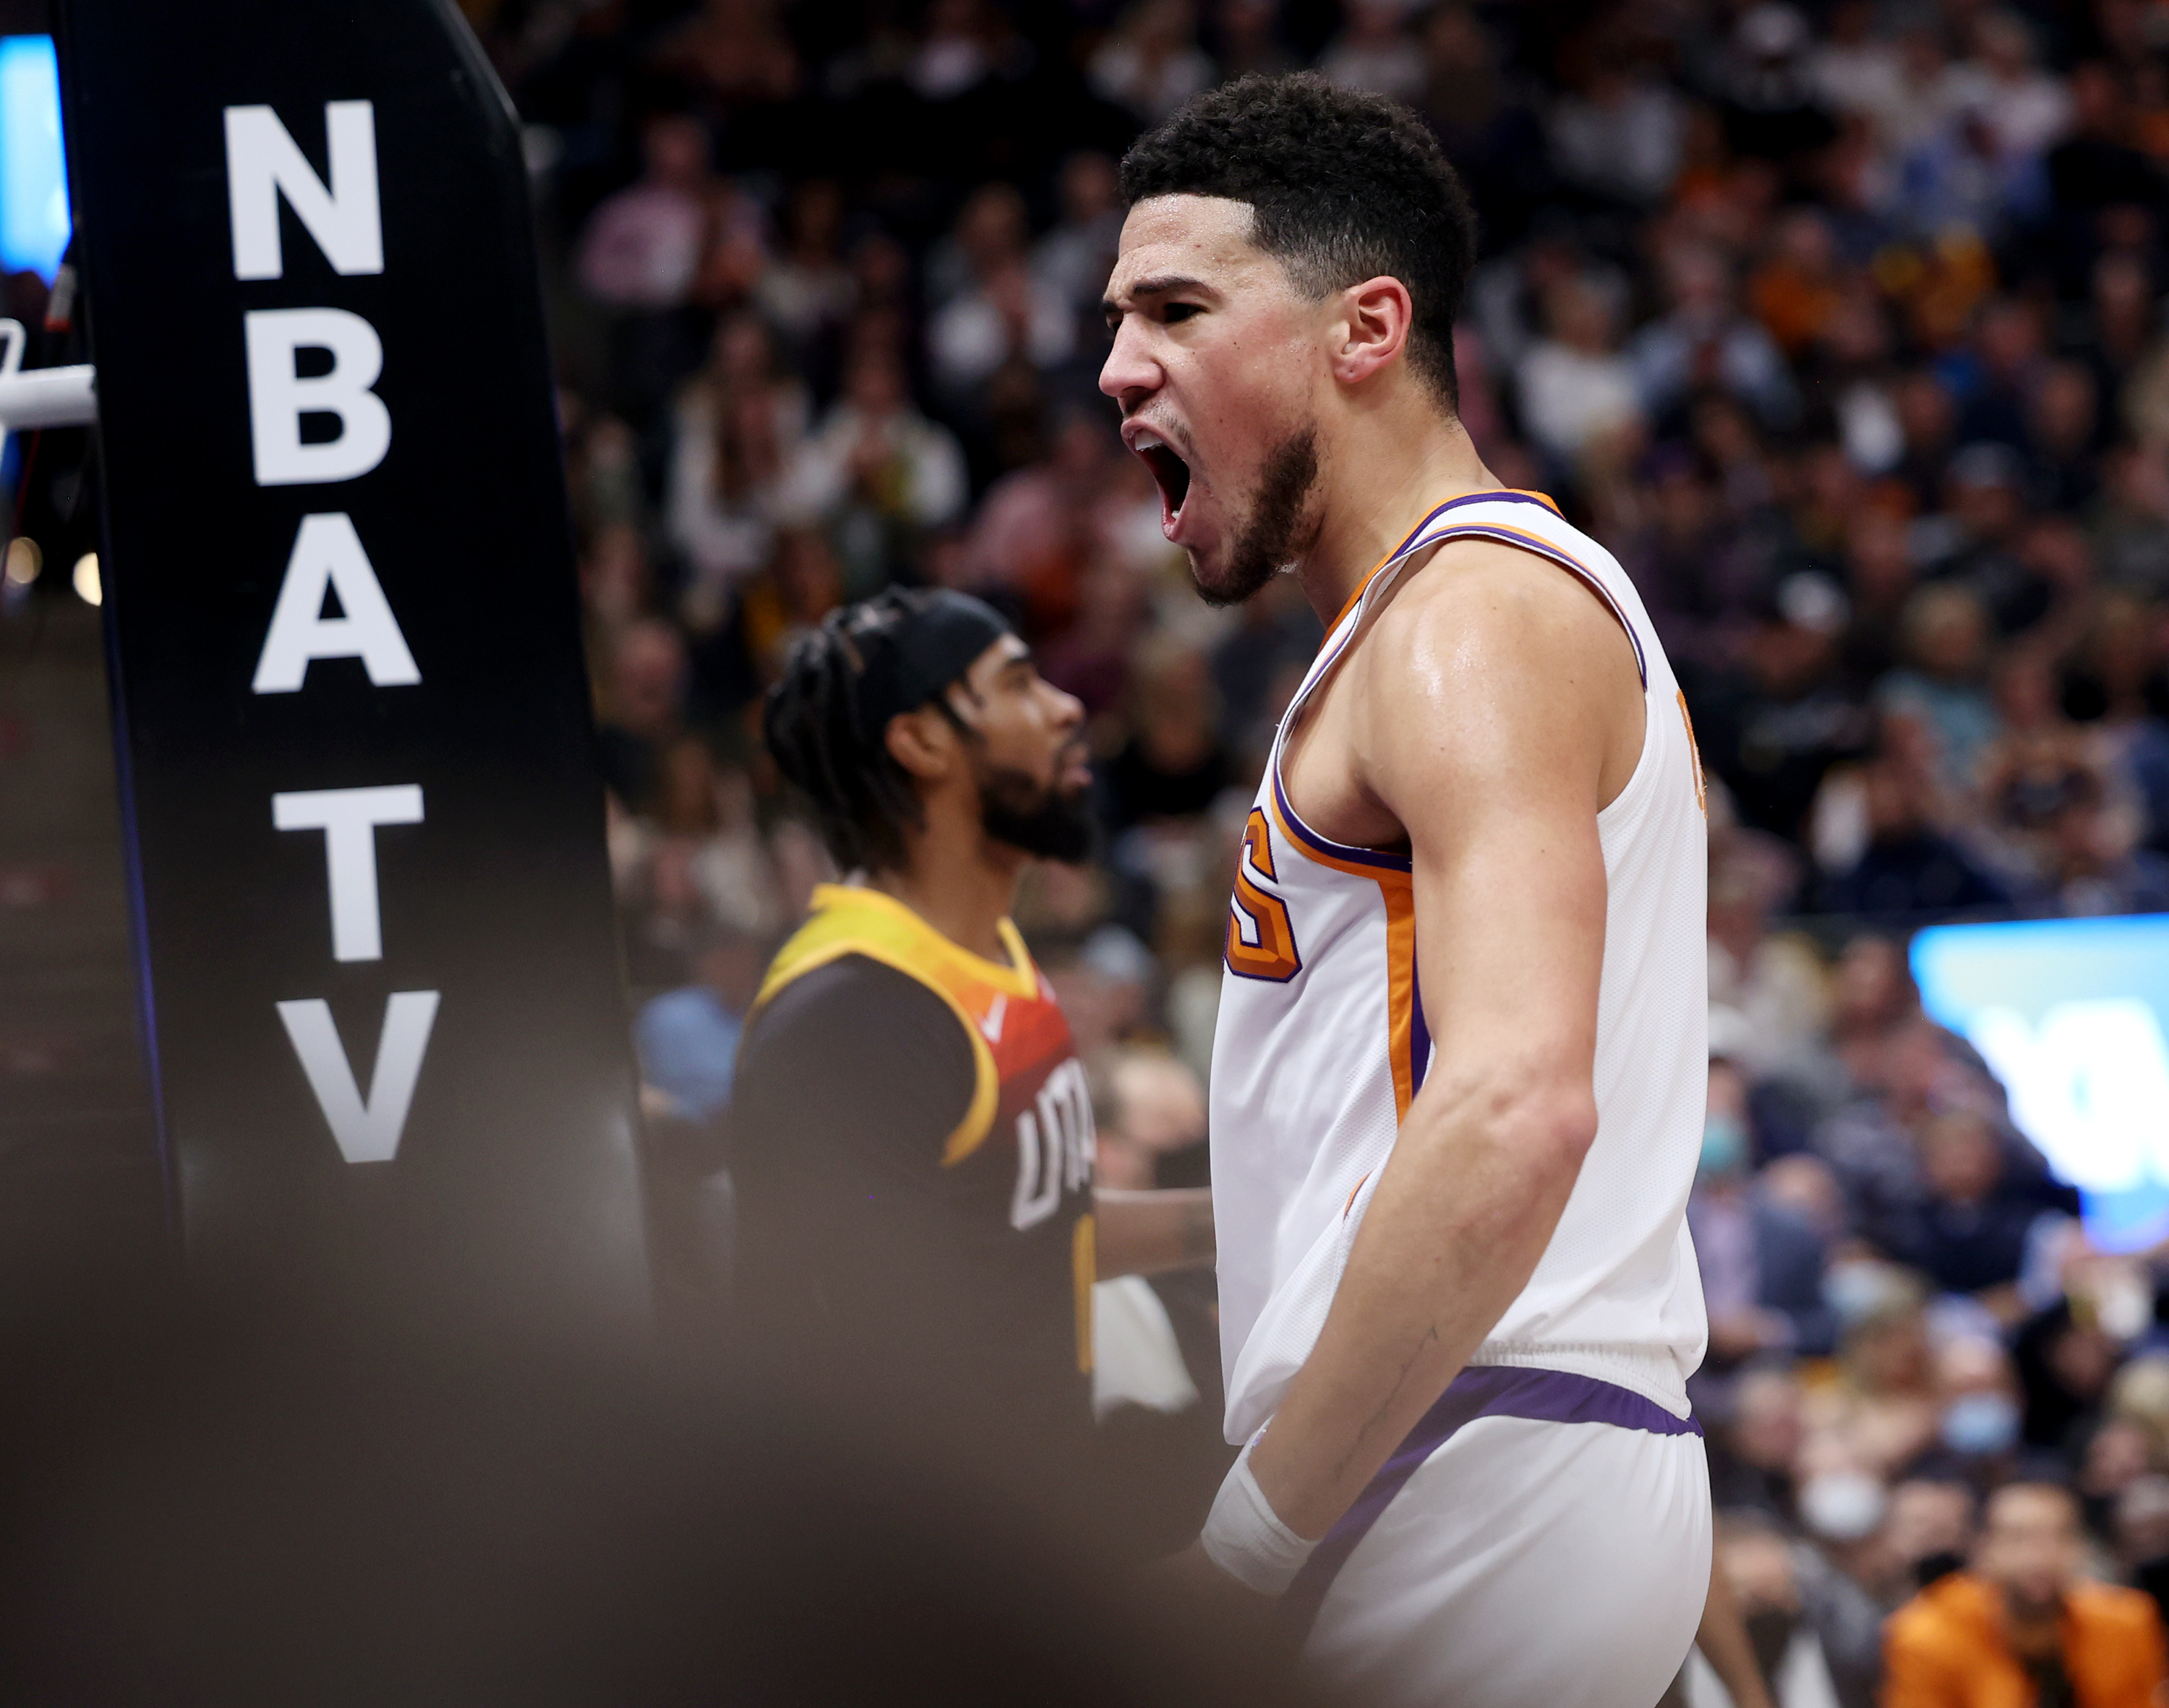 Phoenix Suns guard Devin Booker (1) yells into the crowd after making a fast brake layup as the Utah Jazz and the Phoenix Suns play an NBA basketball game in Salt Lake City at Vivint Arena on Wednesday, Jan. 26, 2022.